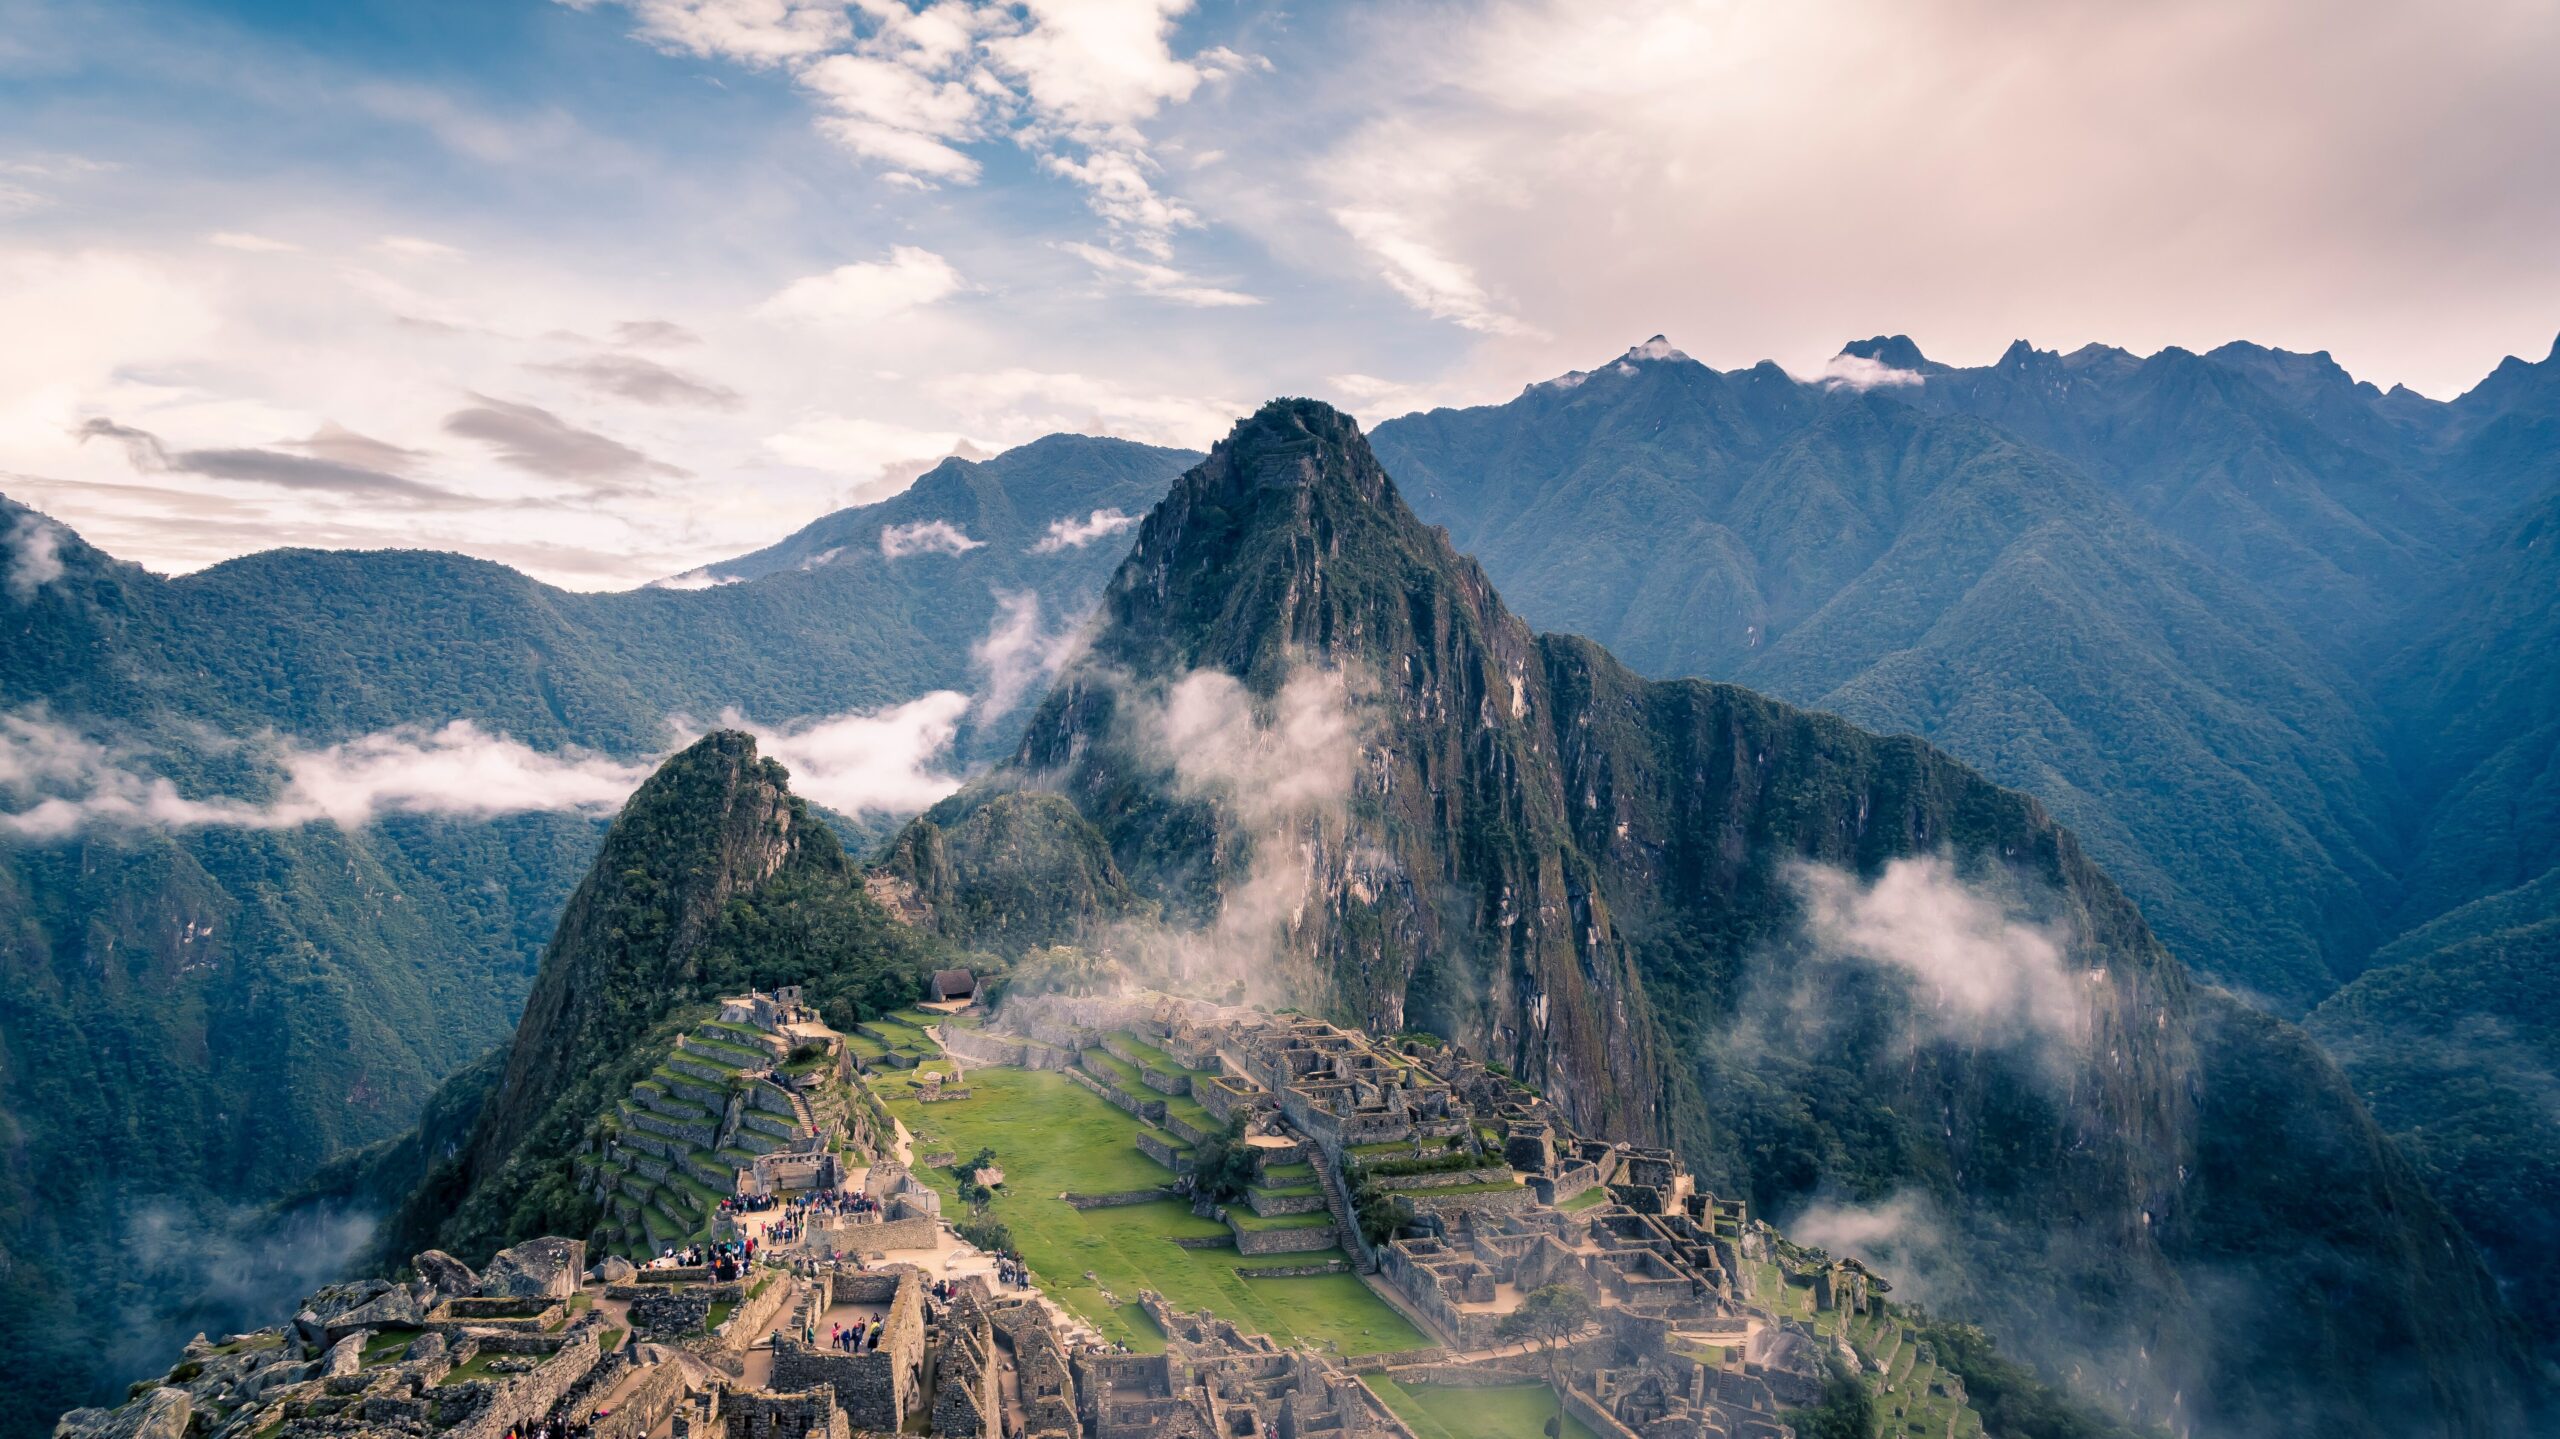 Machu Picchu- Sacred Valley in the Peruvian Andes